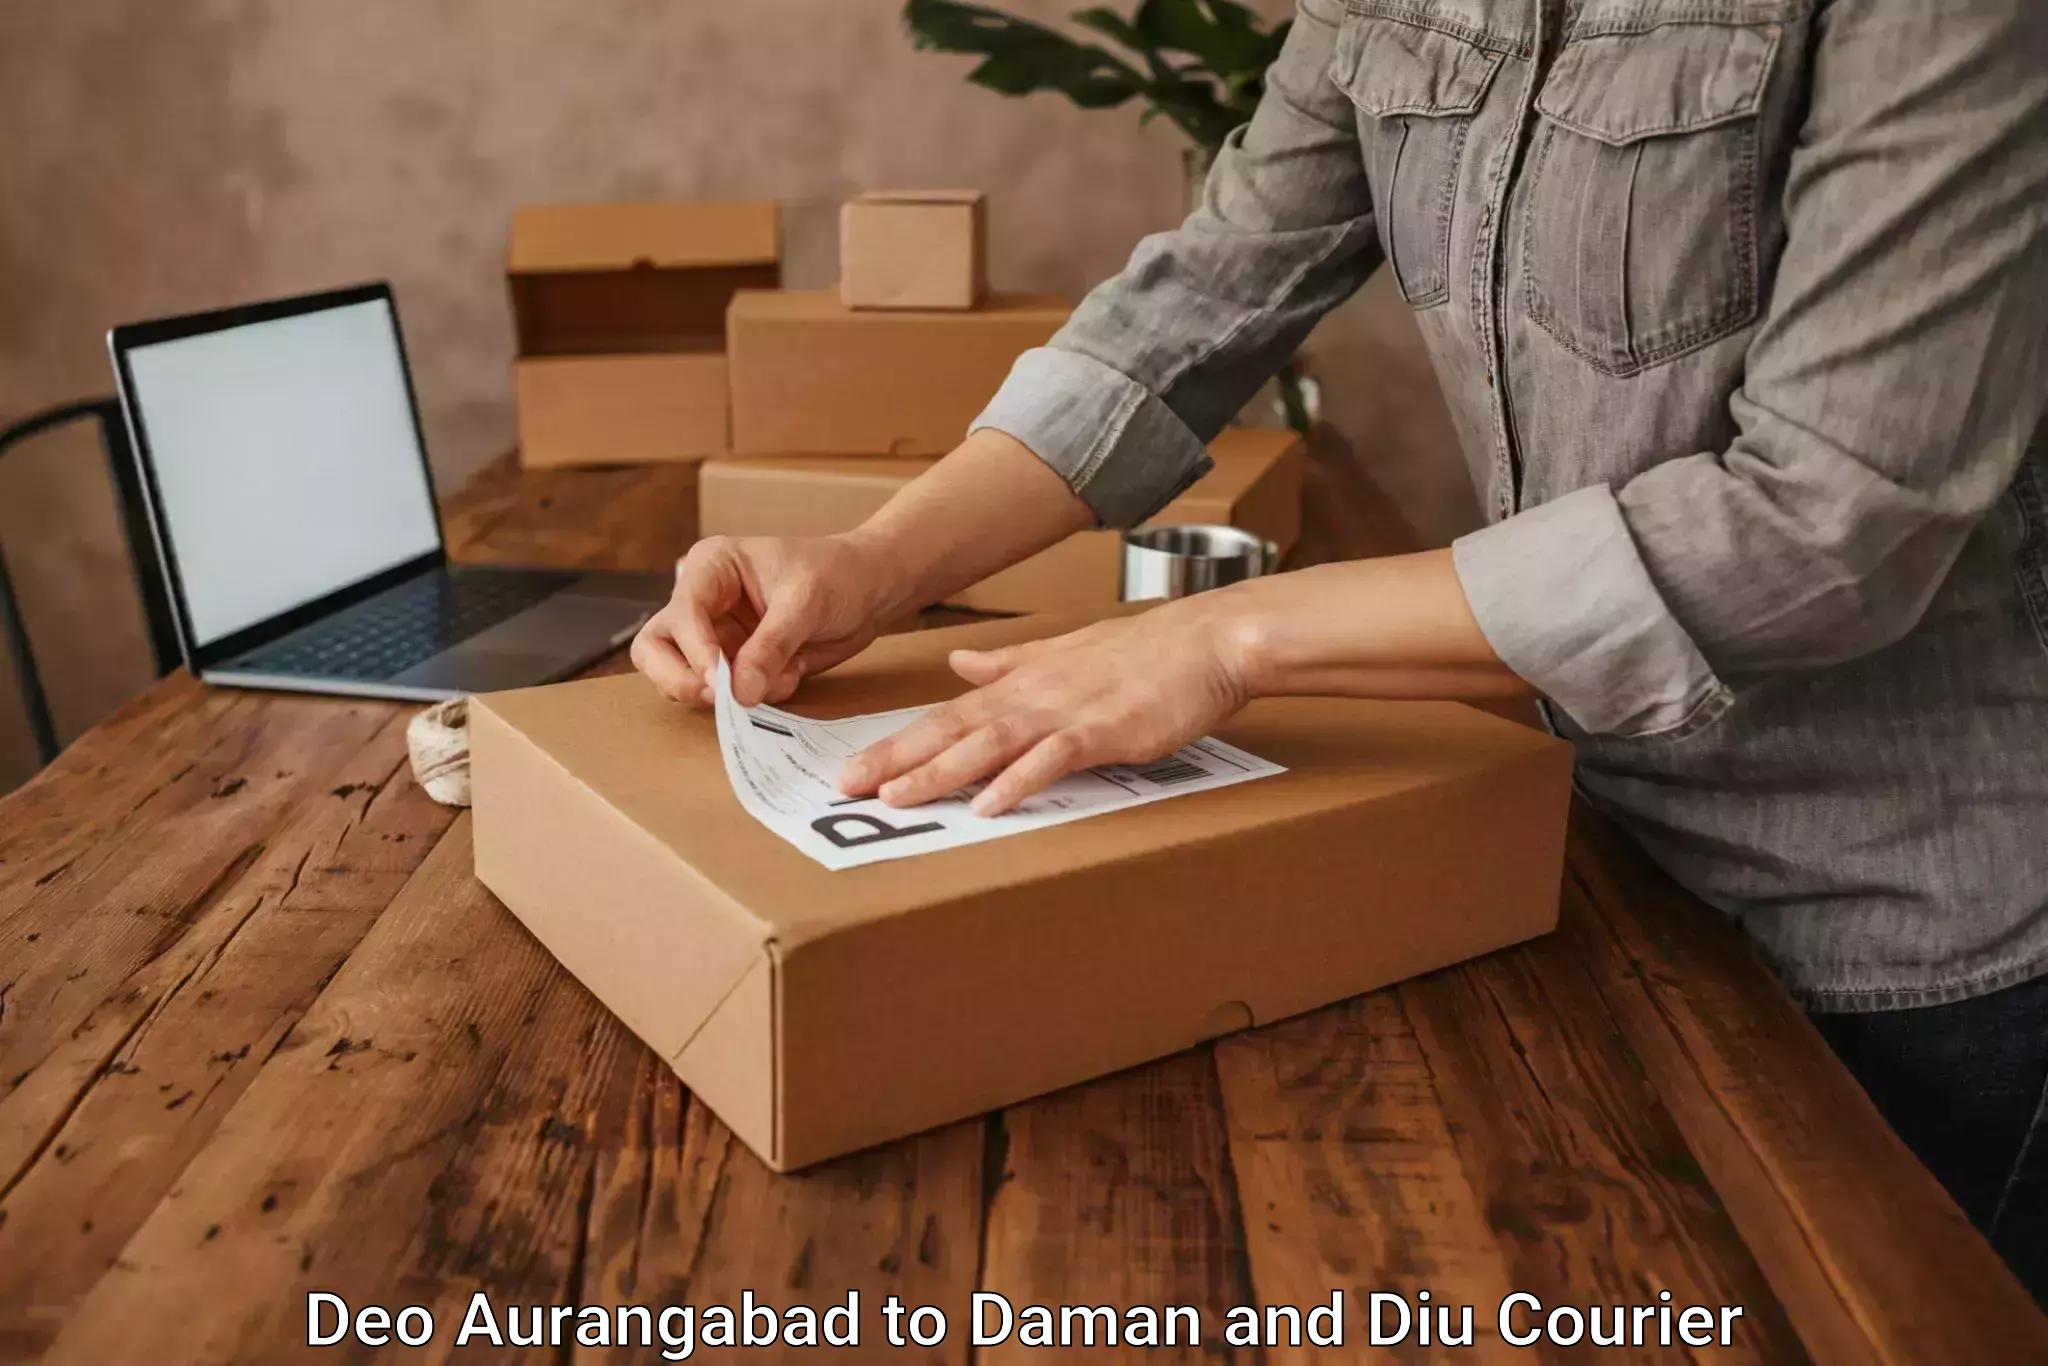 Furniture moving plans in Deo Aurangabad to Diu